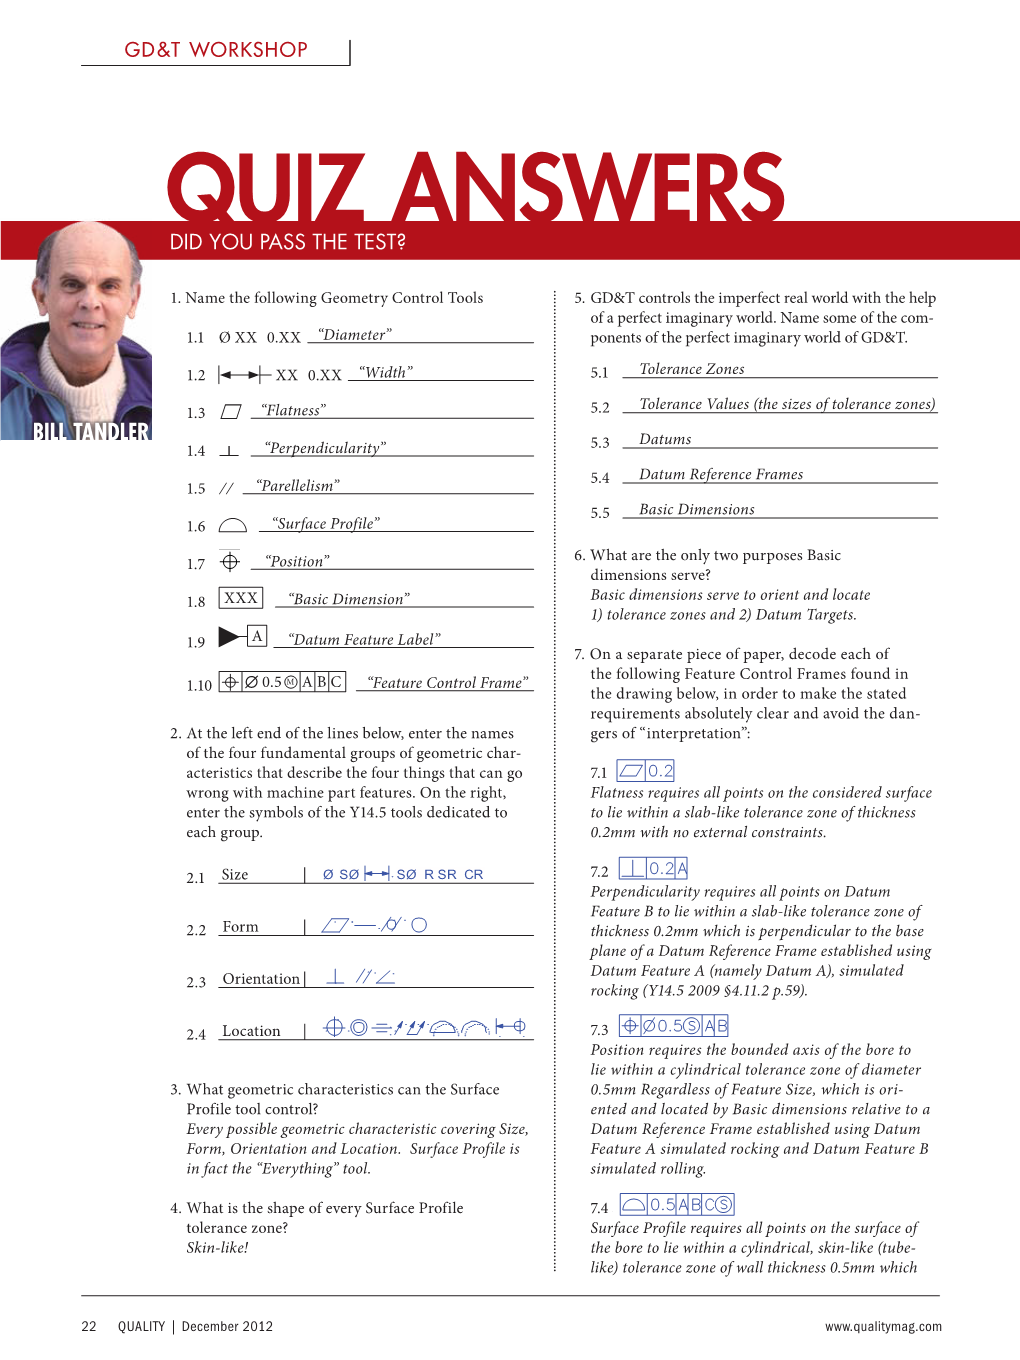 Quiz Answers Did You Pass the Test?